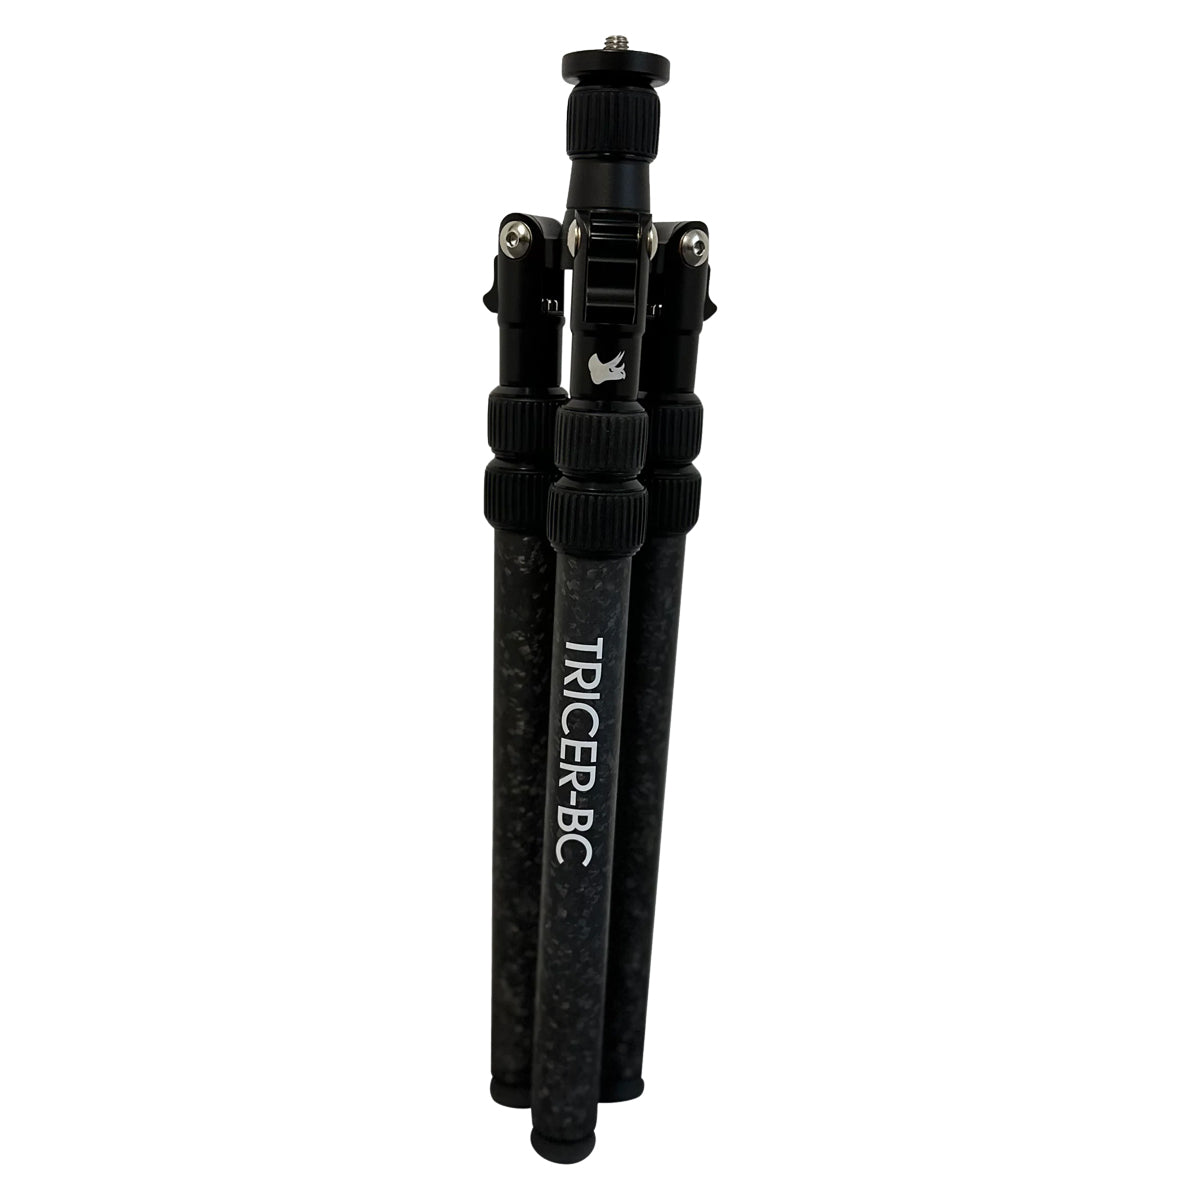 Tricer BC Tripod in  by GOHUNT | Tricer - GOHUNT Shop